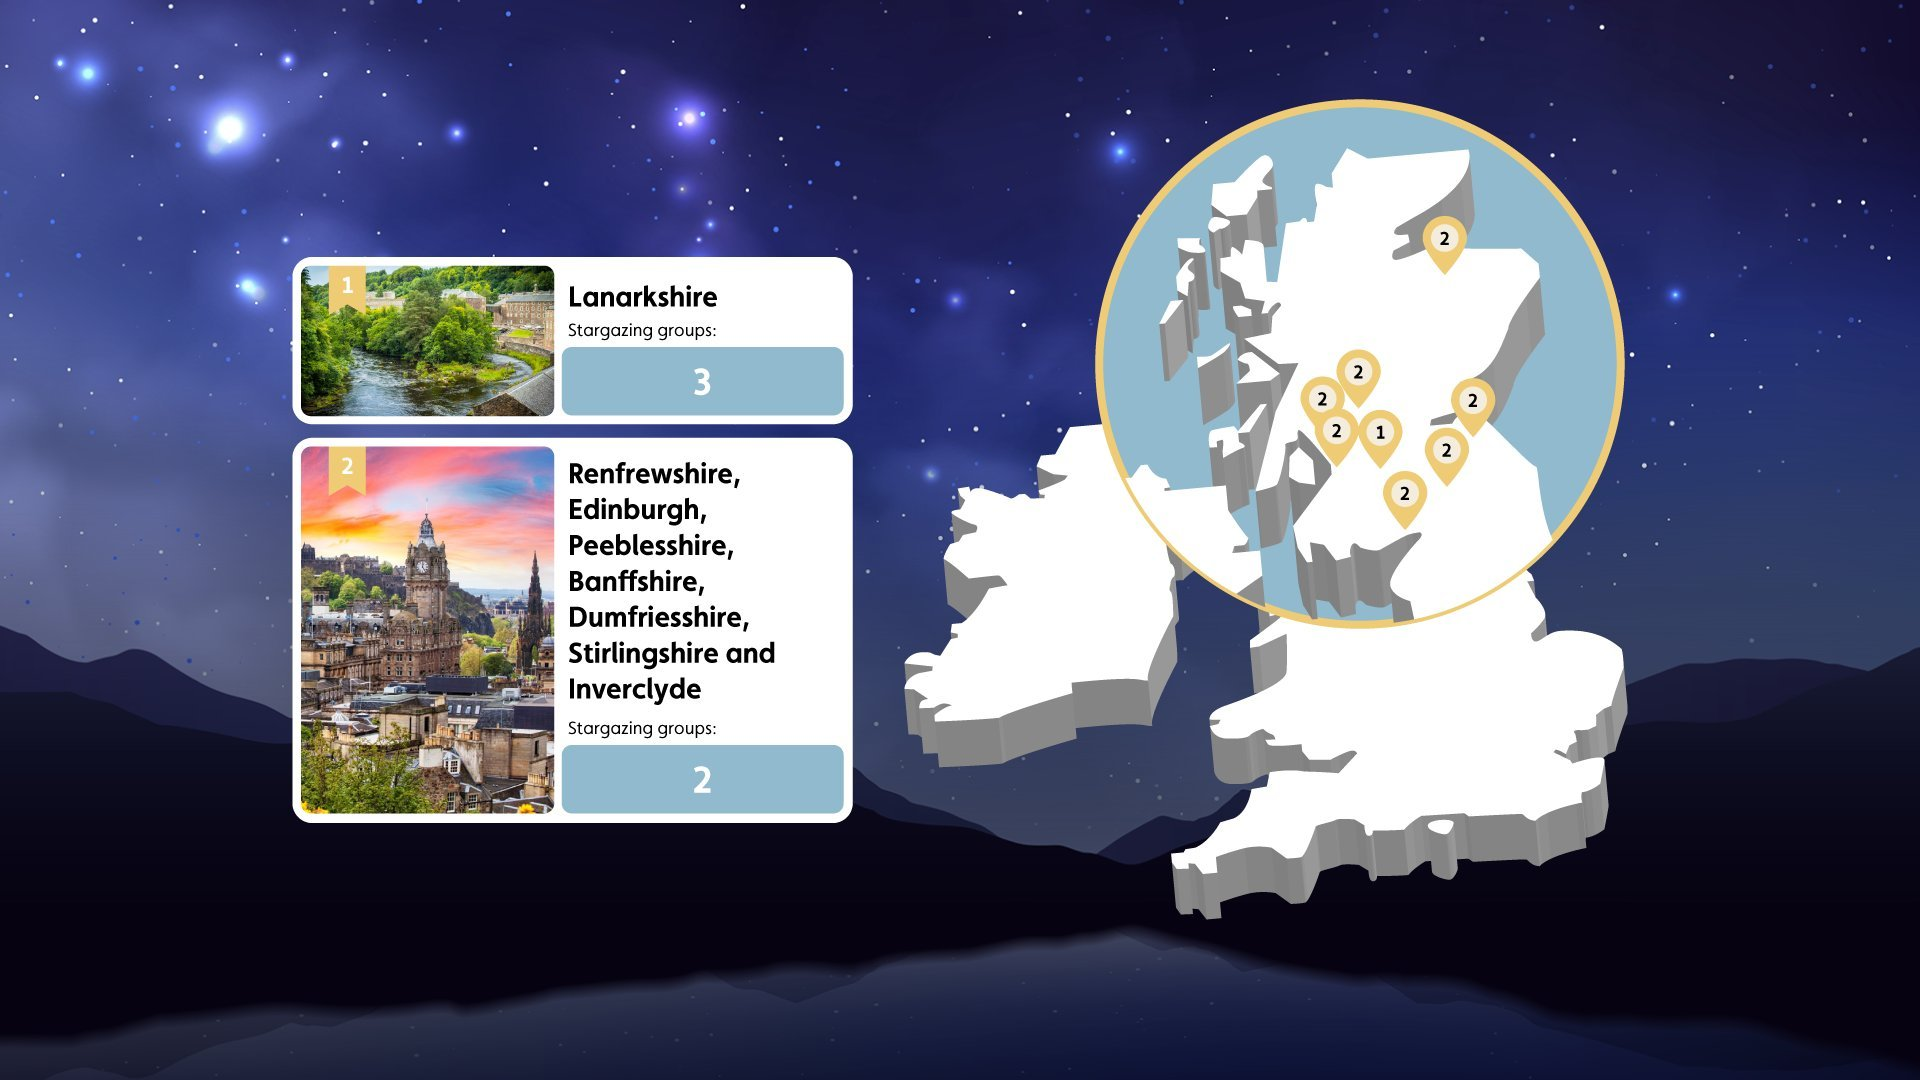 Lanarkshire is the best county in Scotland for stargazing groups